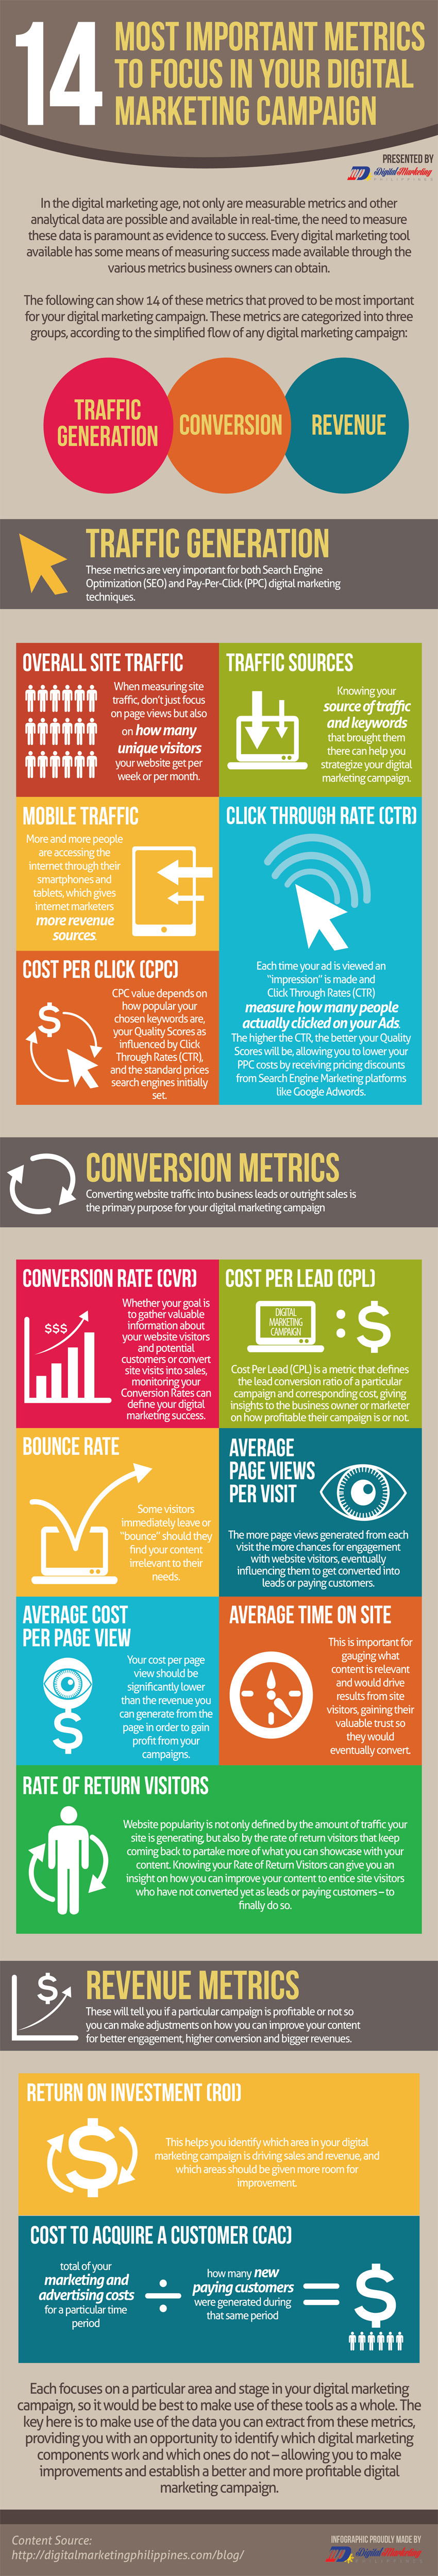 14 Most Important Metrics to Focus in Your Digital Marketing Campaign